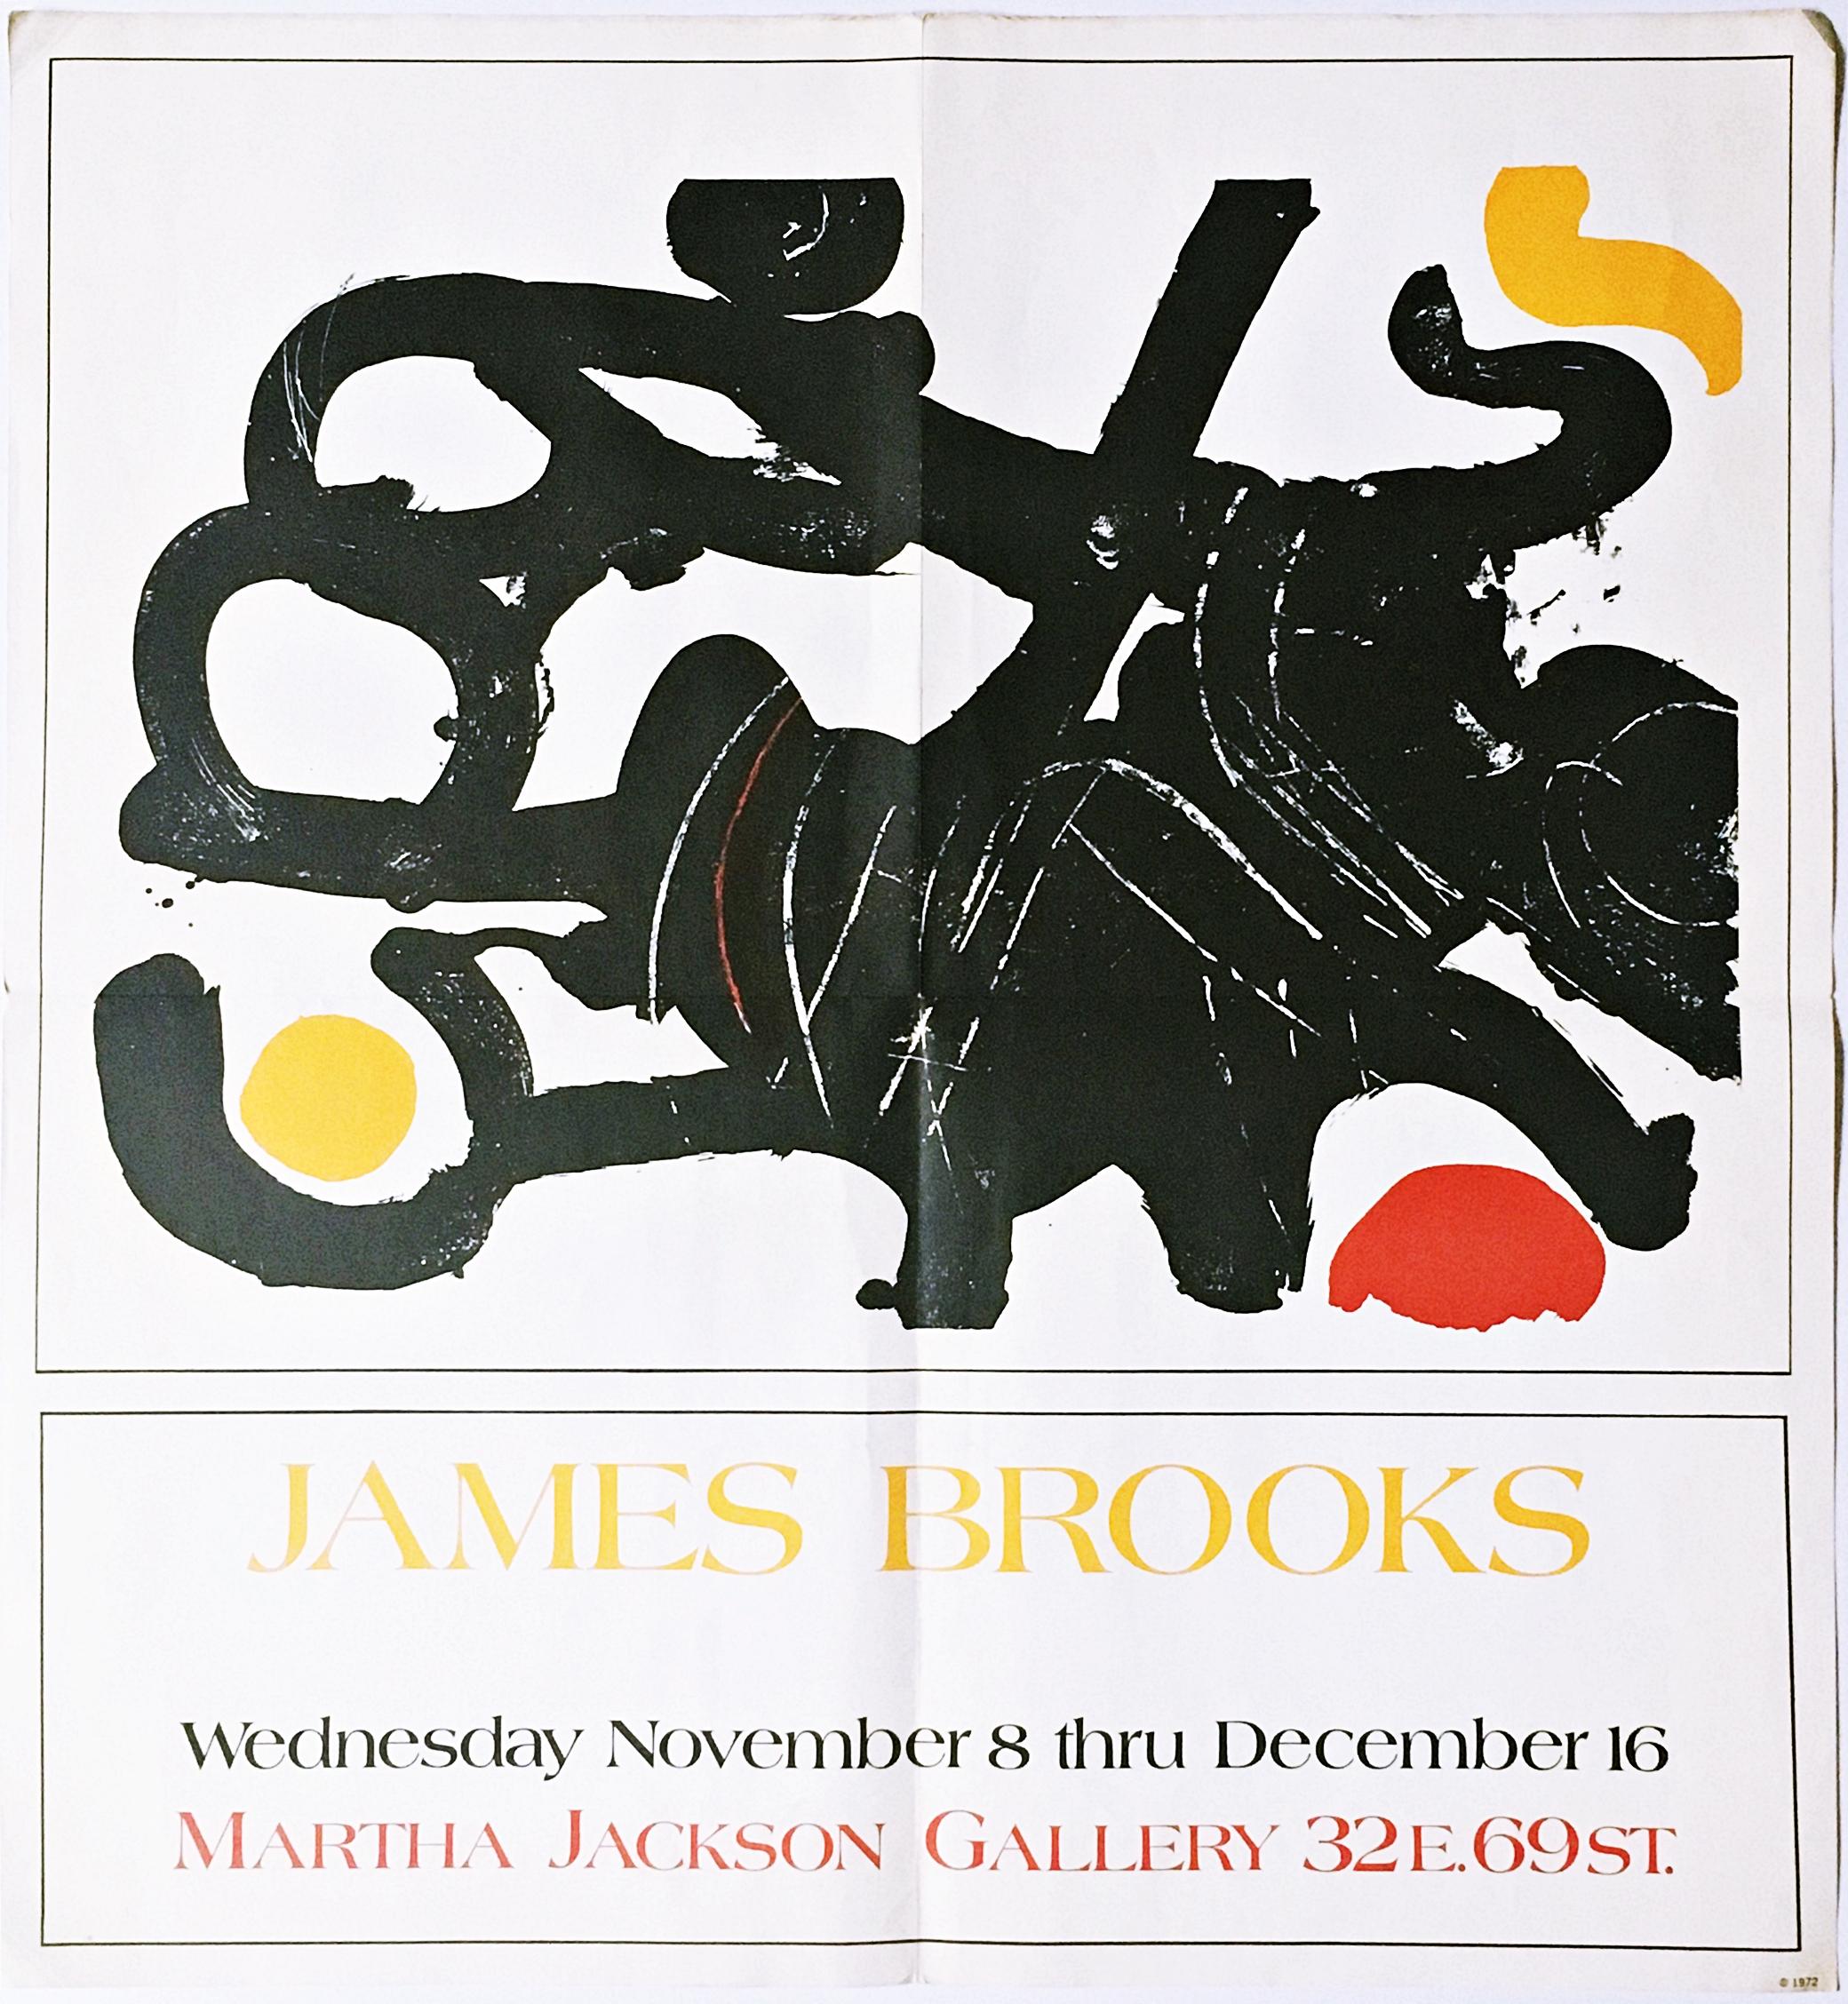 James Brooks
James Brooks at Martha Jackson gallery (rare Abstract Expressionist poster), 1972
Offset Lithograph poster
Unsigned, unnumbered limited edition
24 1/4 × 22 3/4 inches
Unframed
Very rare and highly collectible vintage James Brooks poster